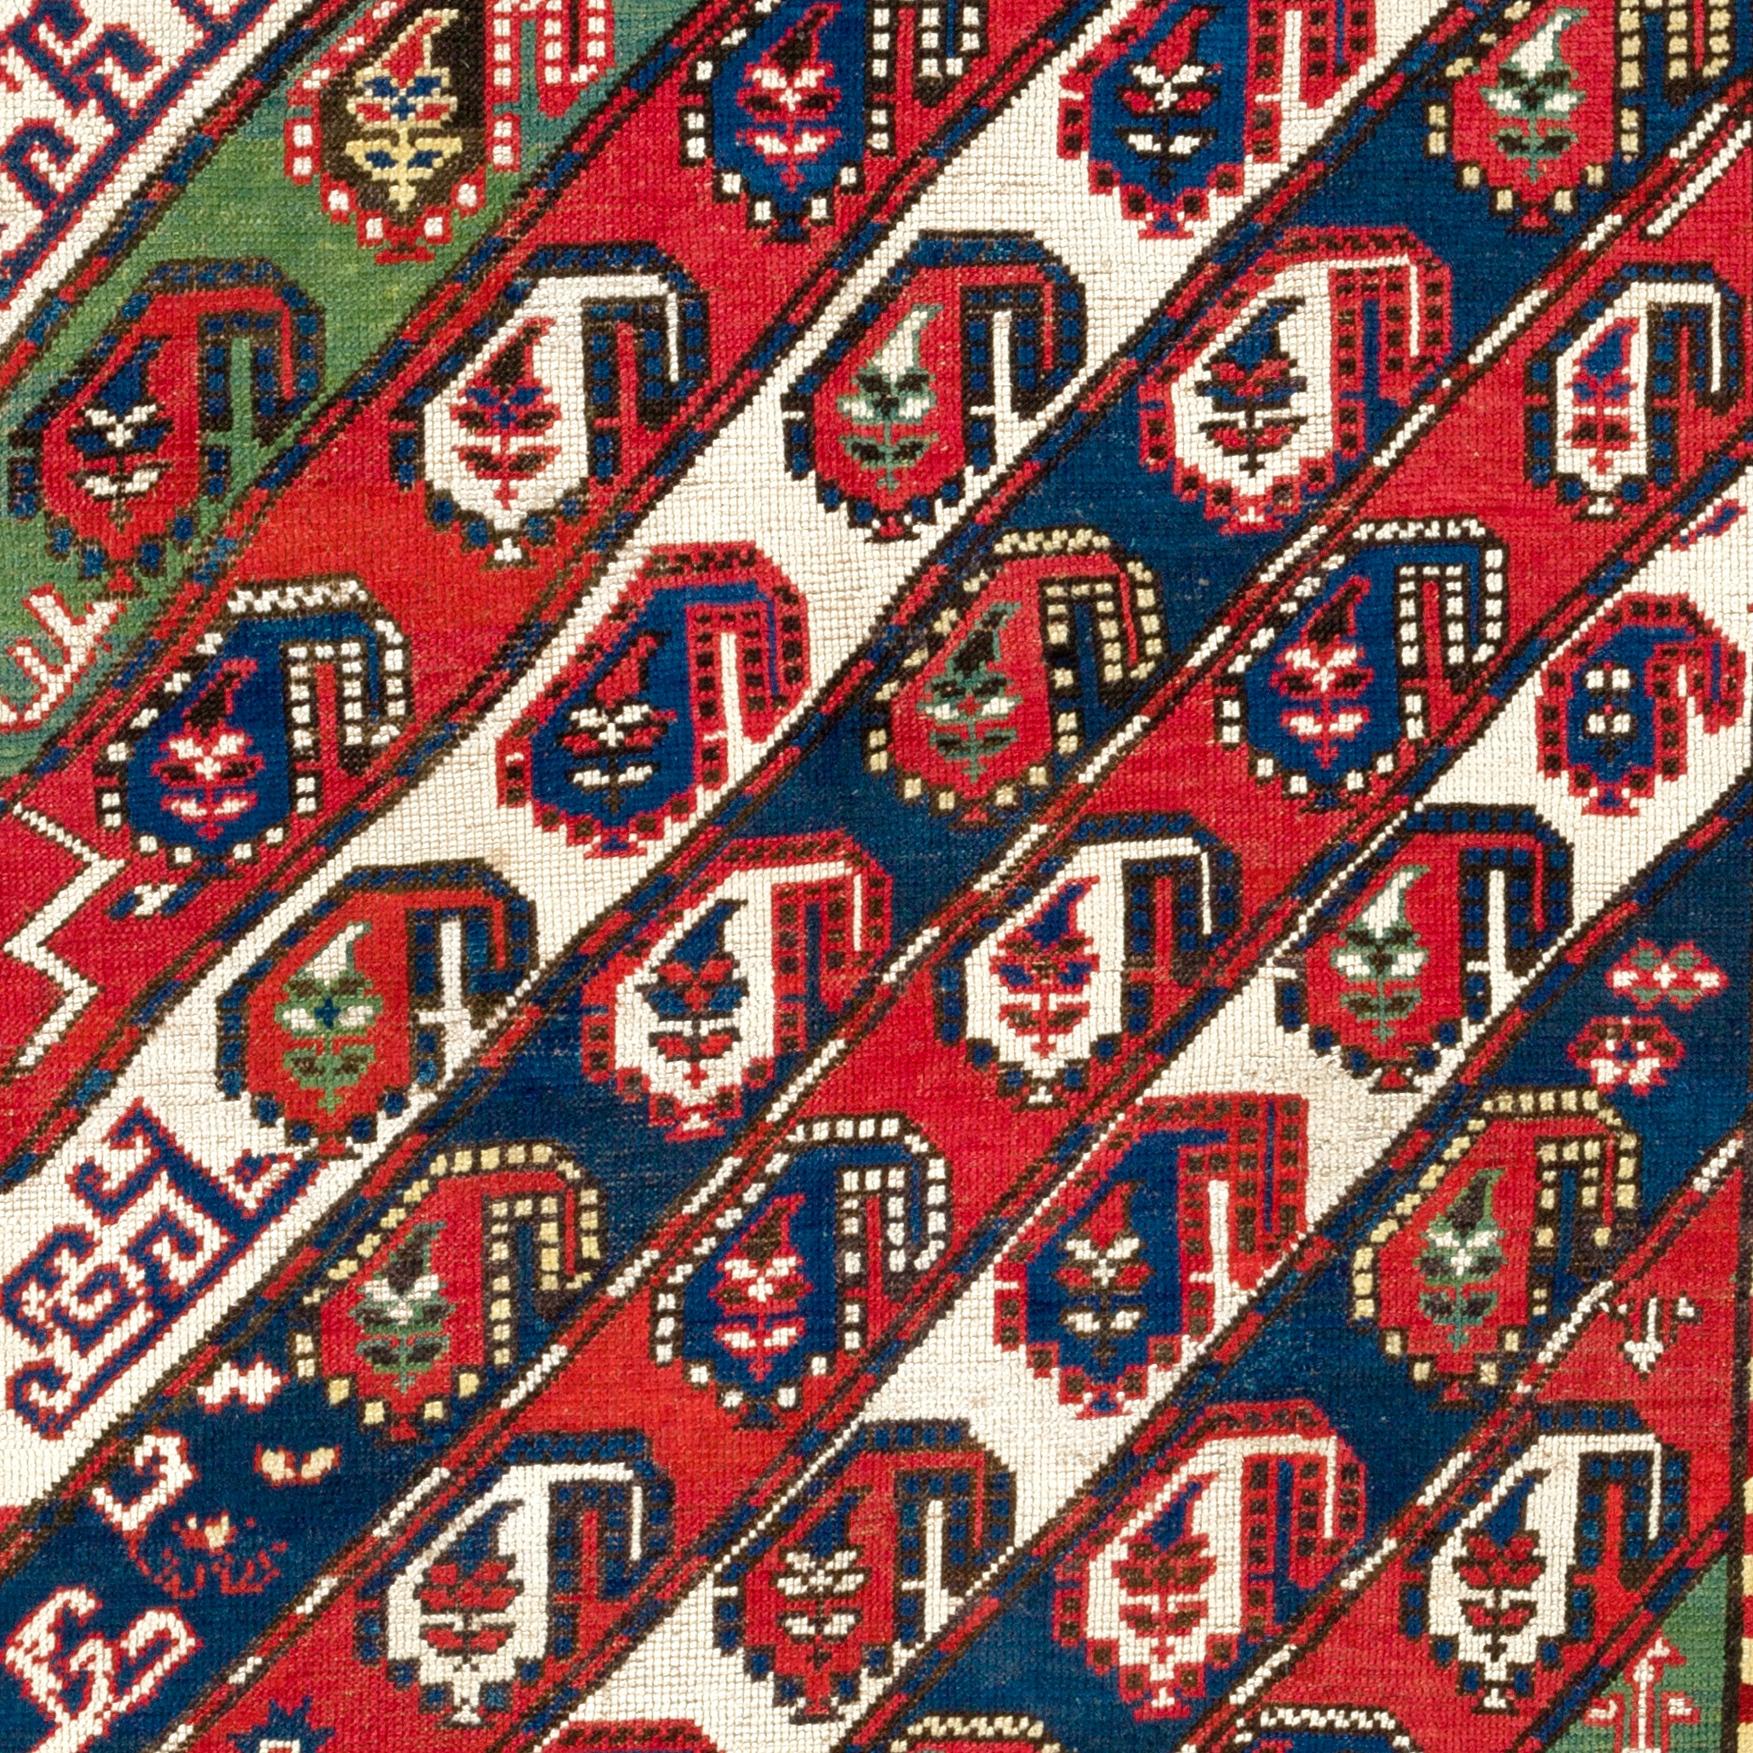 Antique Caucasian Gendje Kazak rug with diagonal stripes decorated with Botehs and other attractive small design elements and with a red border depicting many flowers. Size: 4.4 x 7.3 Ft
100% wool and natural dyes. Good condition. Provenance: A